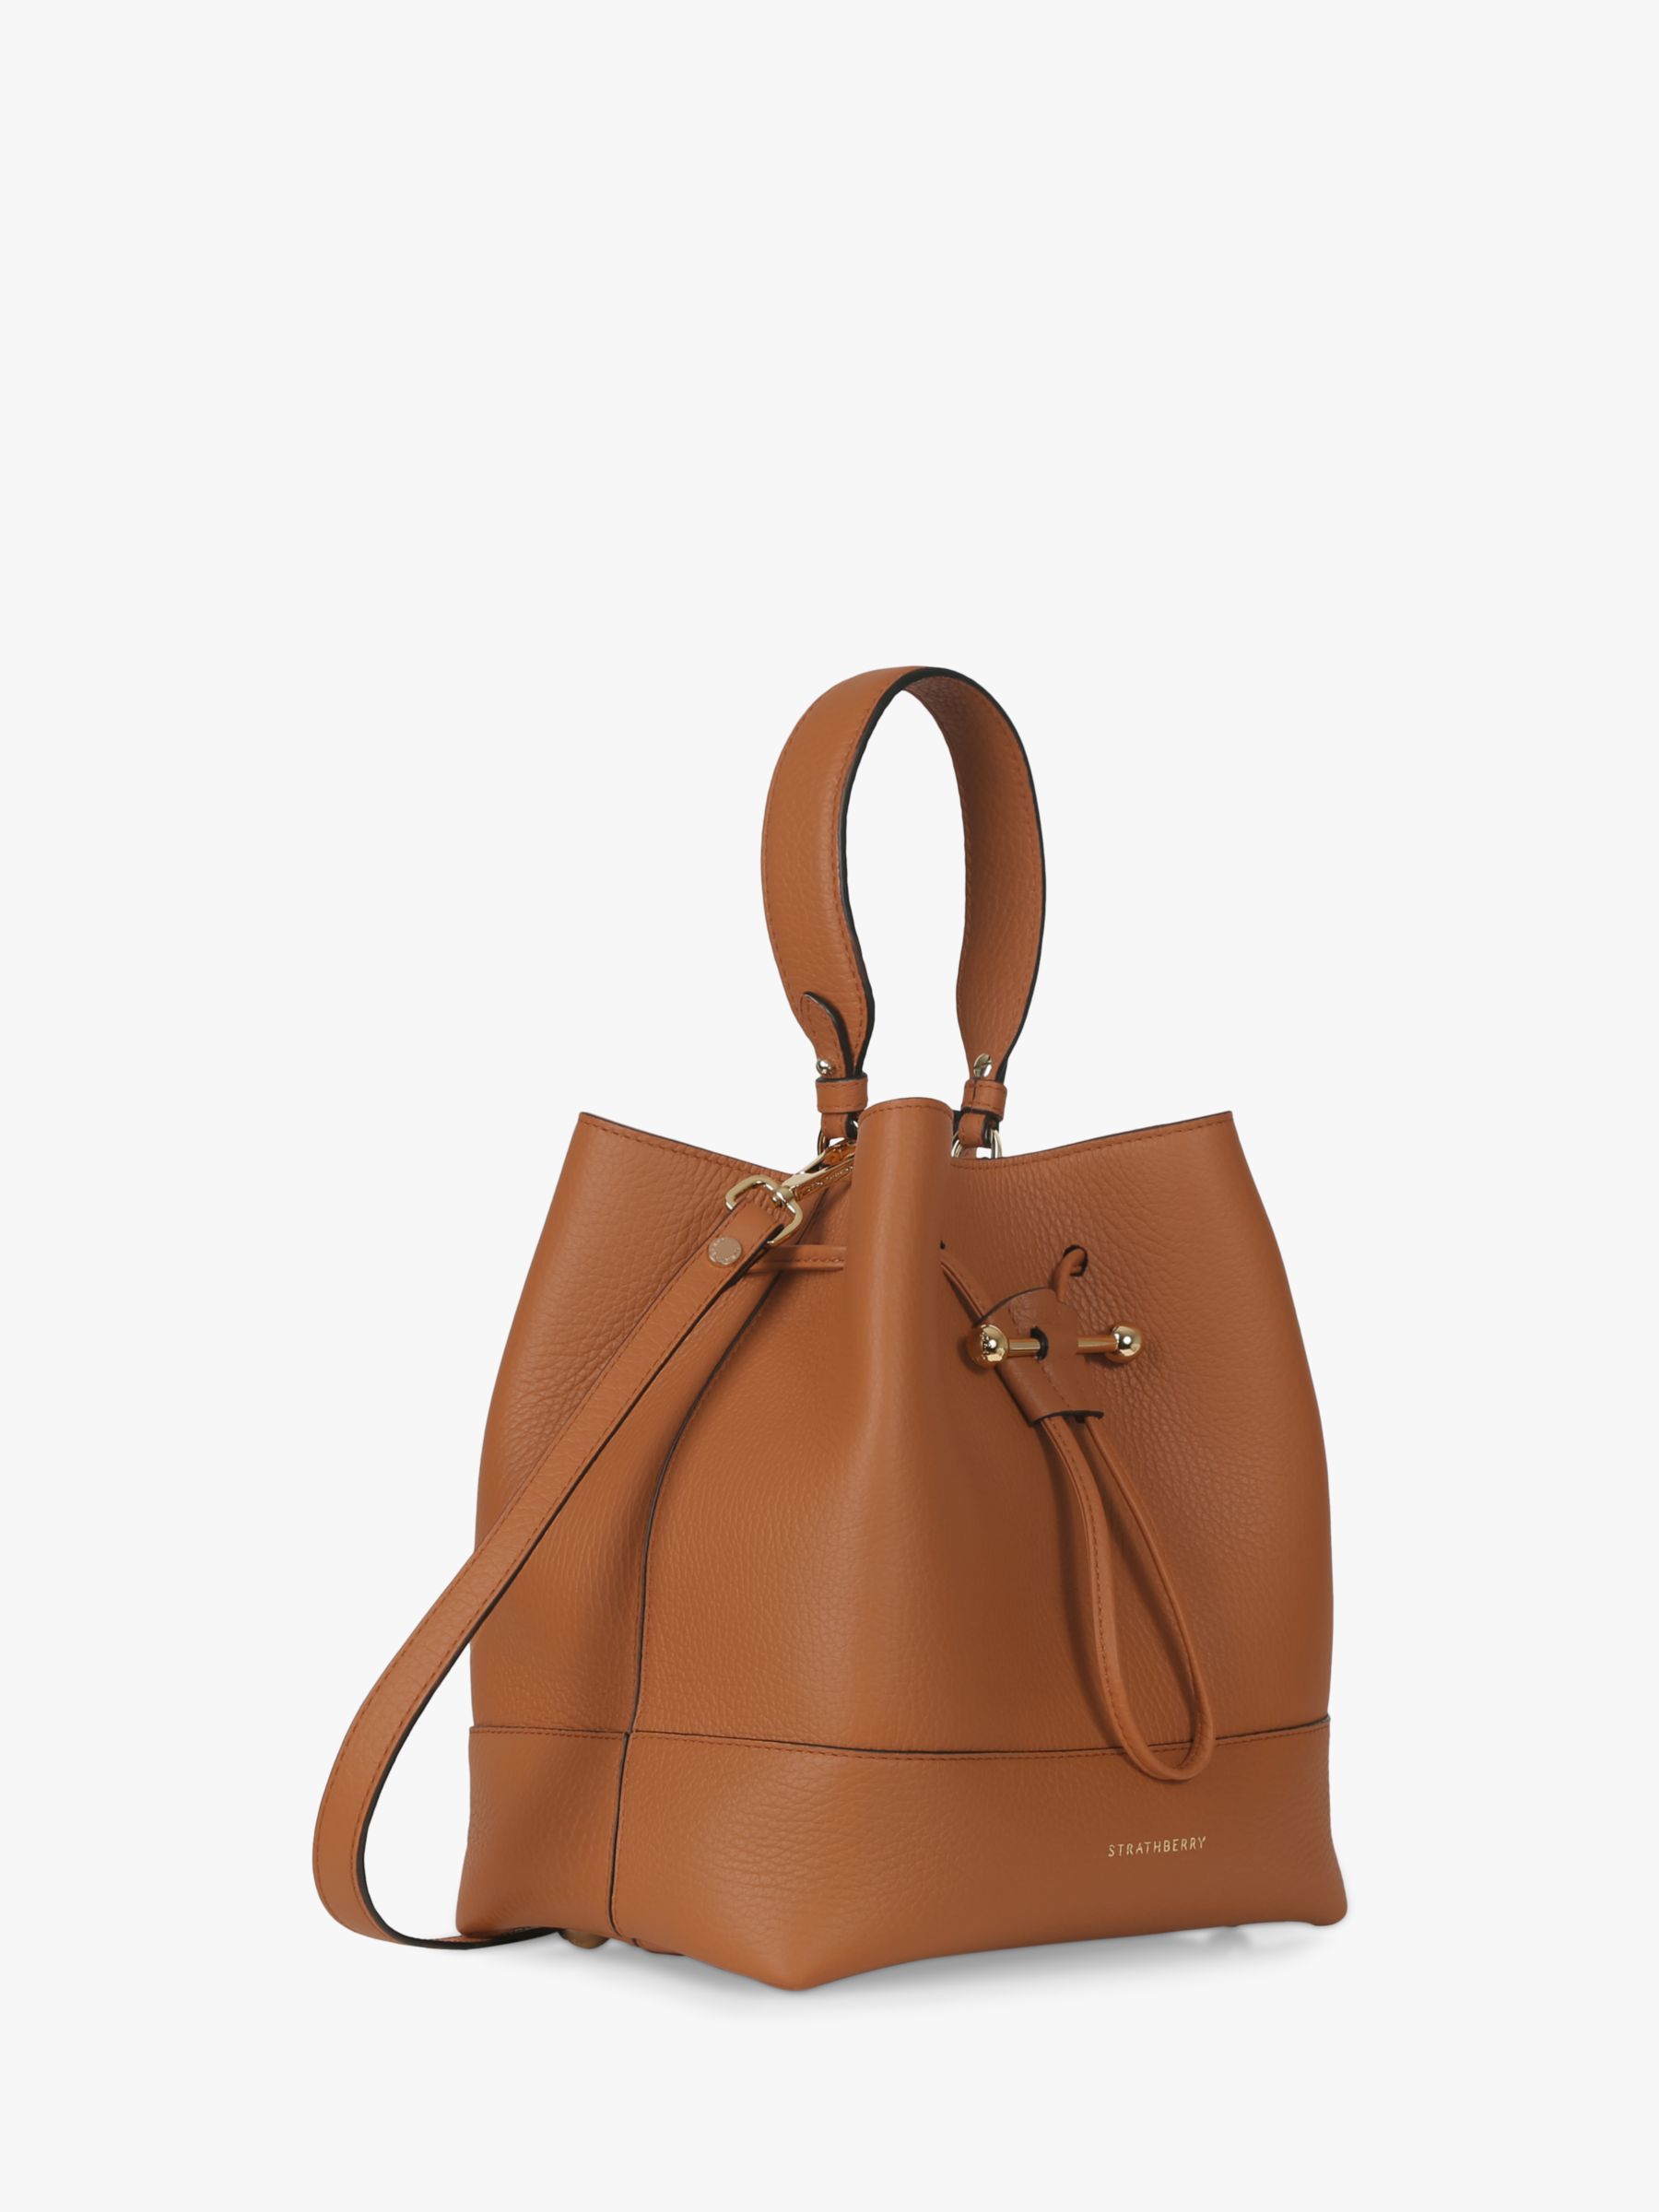 Strathberry - Spacious and stylish - the Lana Midi is the perfect everyday  bag. Shop now at Strathberry.com